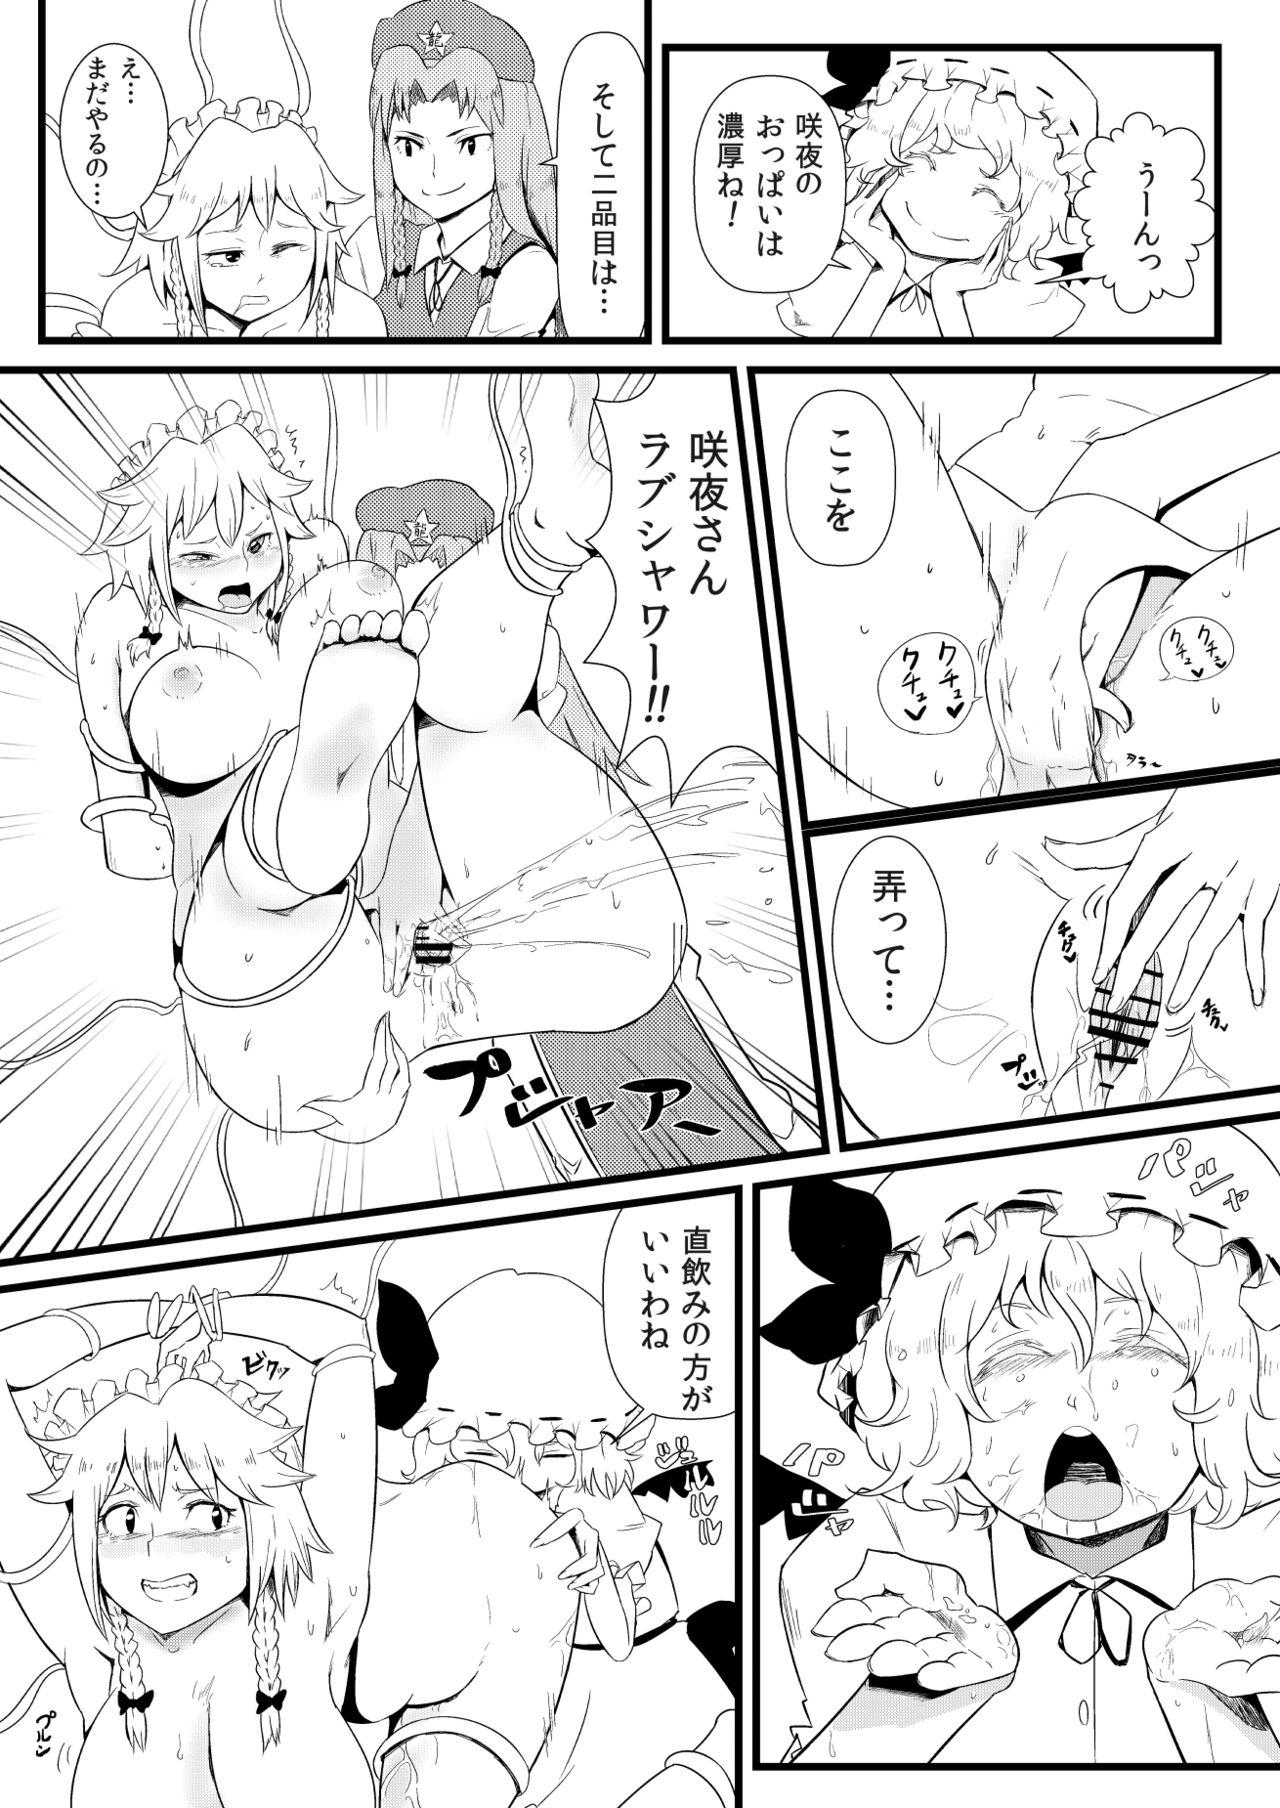 Boobs 東方板としあき合同誌5 - Touhou project Home - Page 7